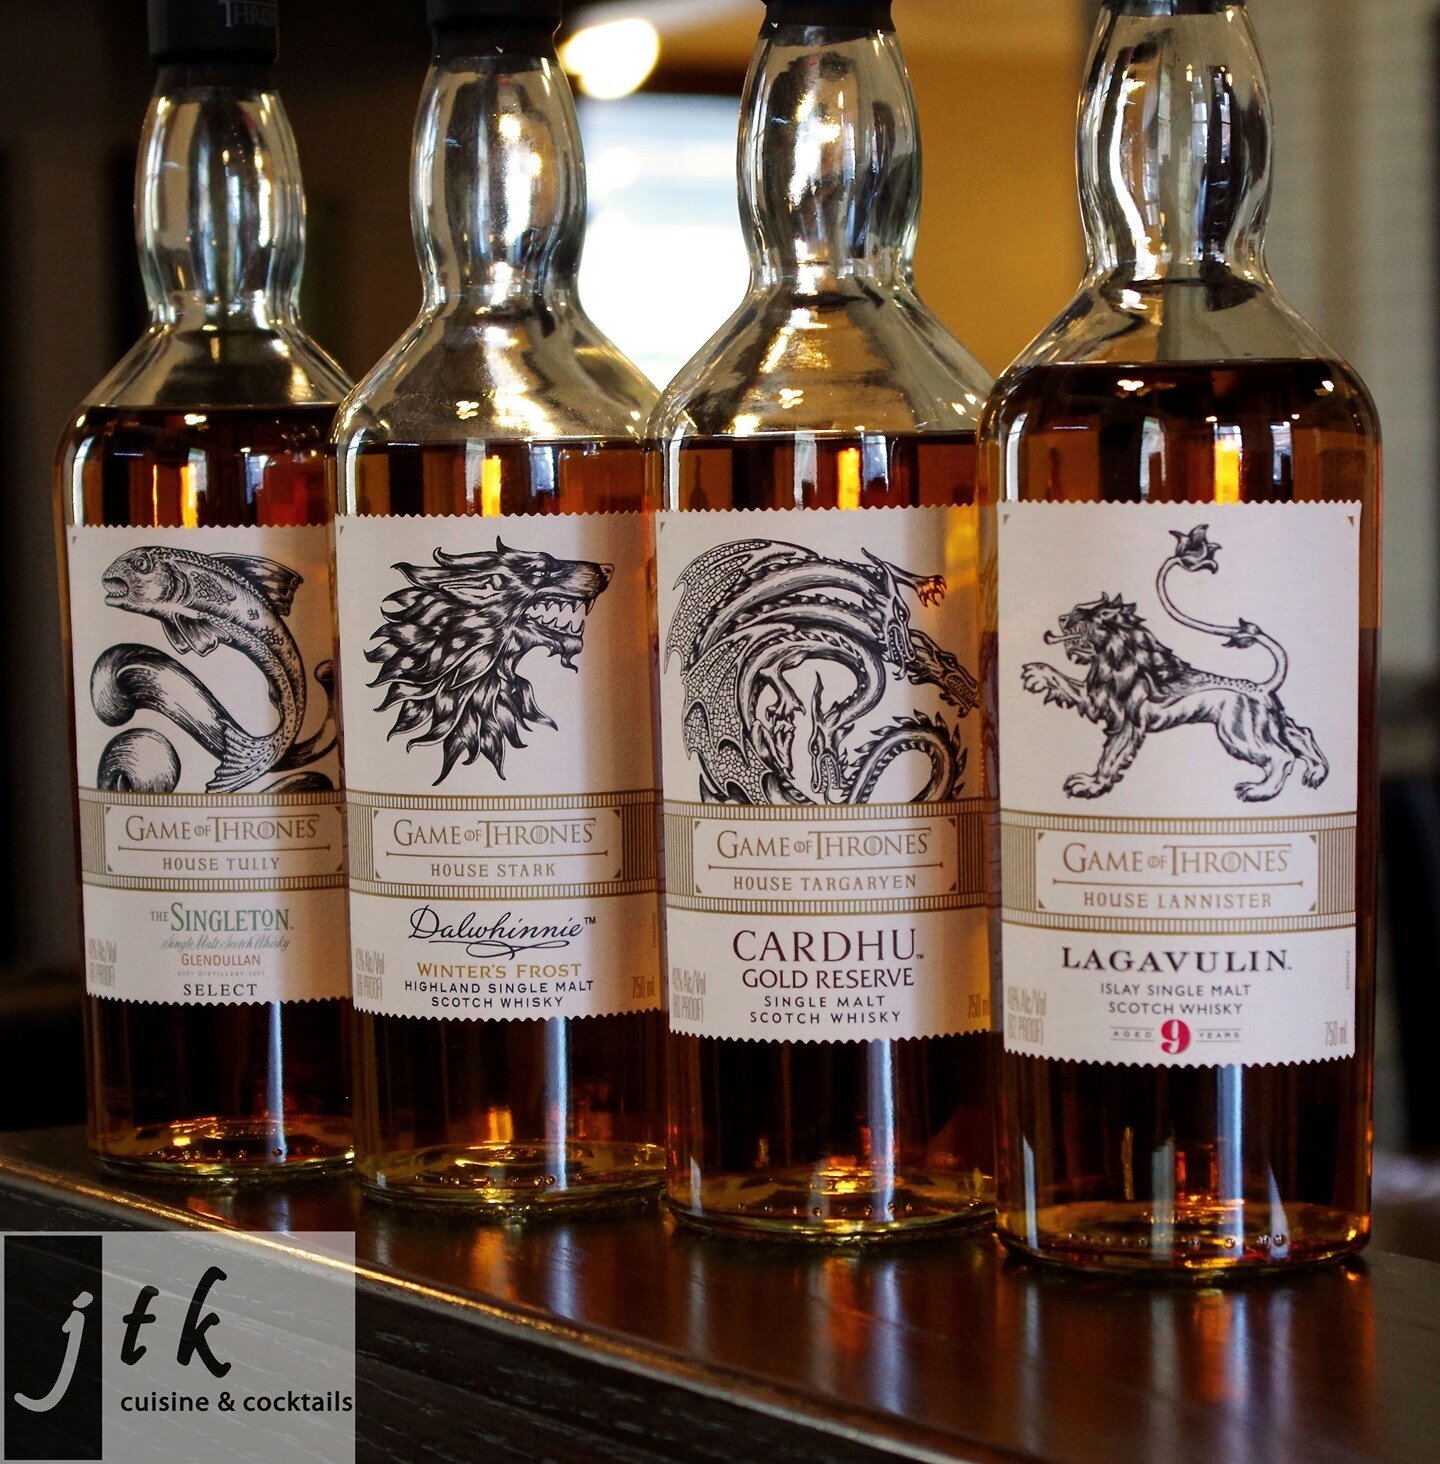 We still have some of the #GameofThrones whiskies in house! And tonight they are $2 off! Come down and enjoy some whiskey on Whiskey Wednesday!⠀⠀
⠀⠀⠀
#jtklnk #downtownlincoln #mylnk #lincolnhaymarket #restaurant #scotch #whiskylover #whisky #whiskydr